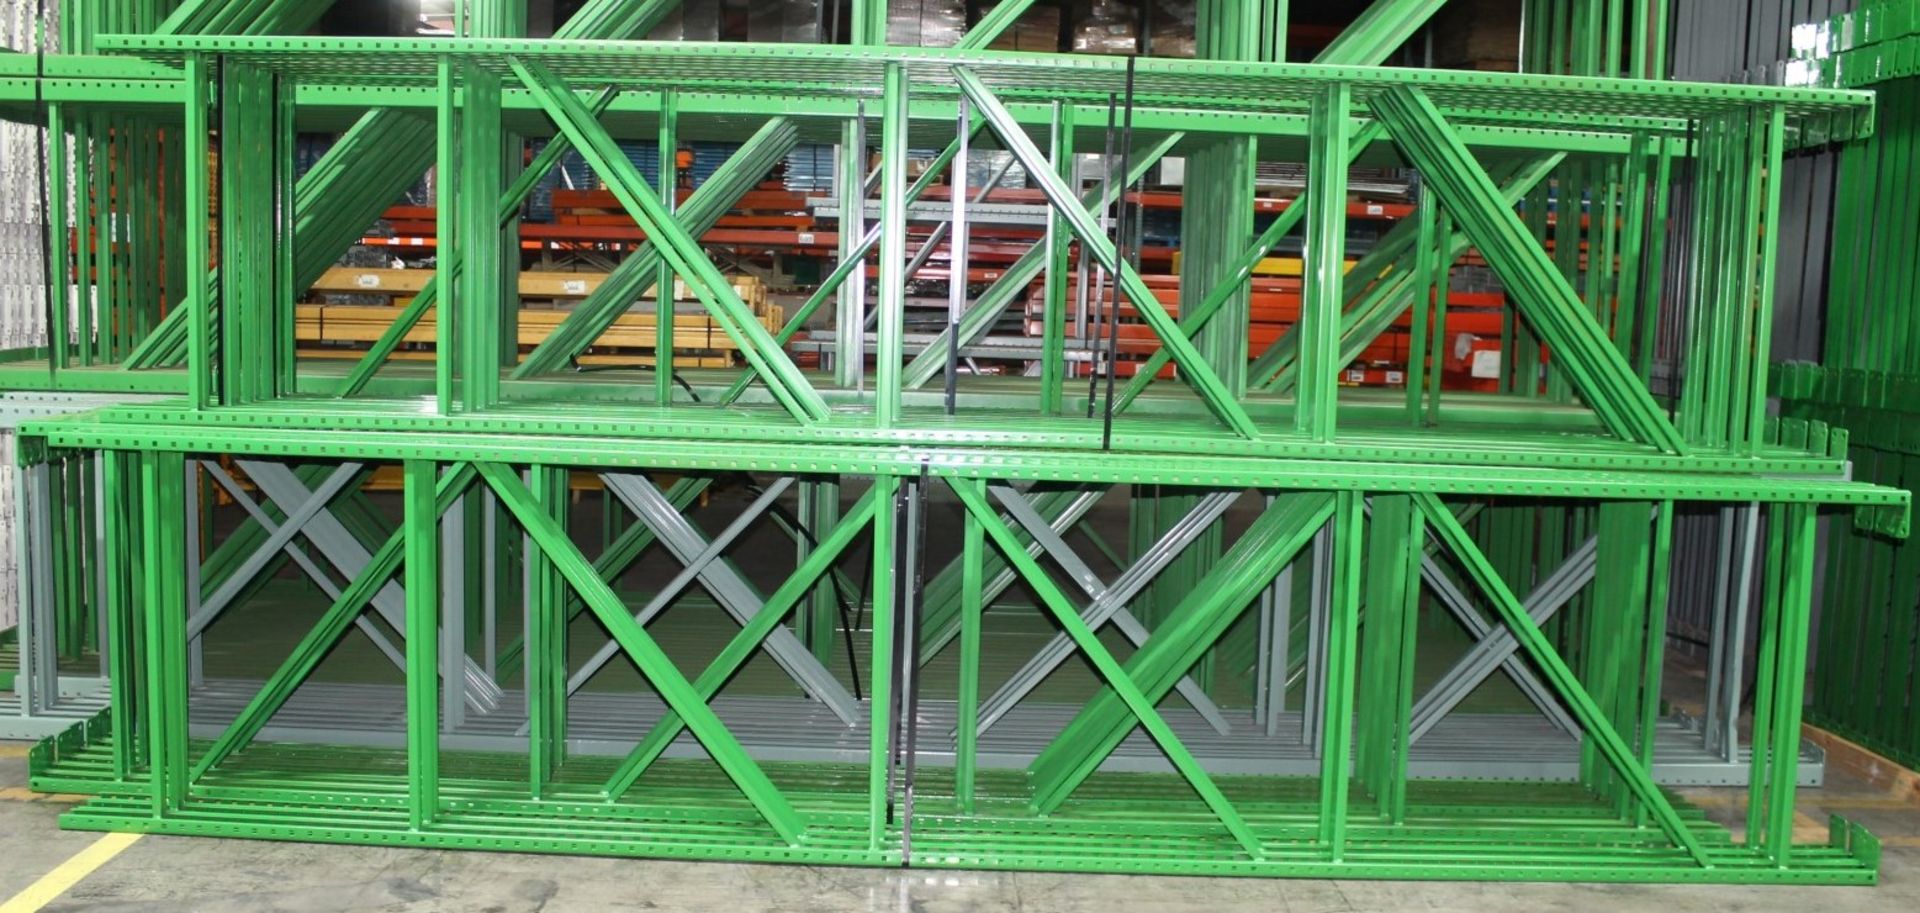 28 BAYS OF TEARDROP STYLE PALLET RACK, LIKE NEW, SIZE: 16'H x 42"D X 8'W - Image 2 of 3